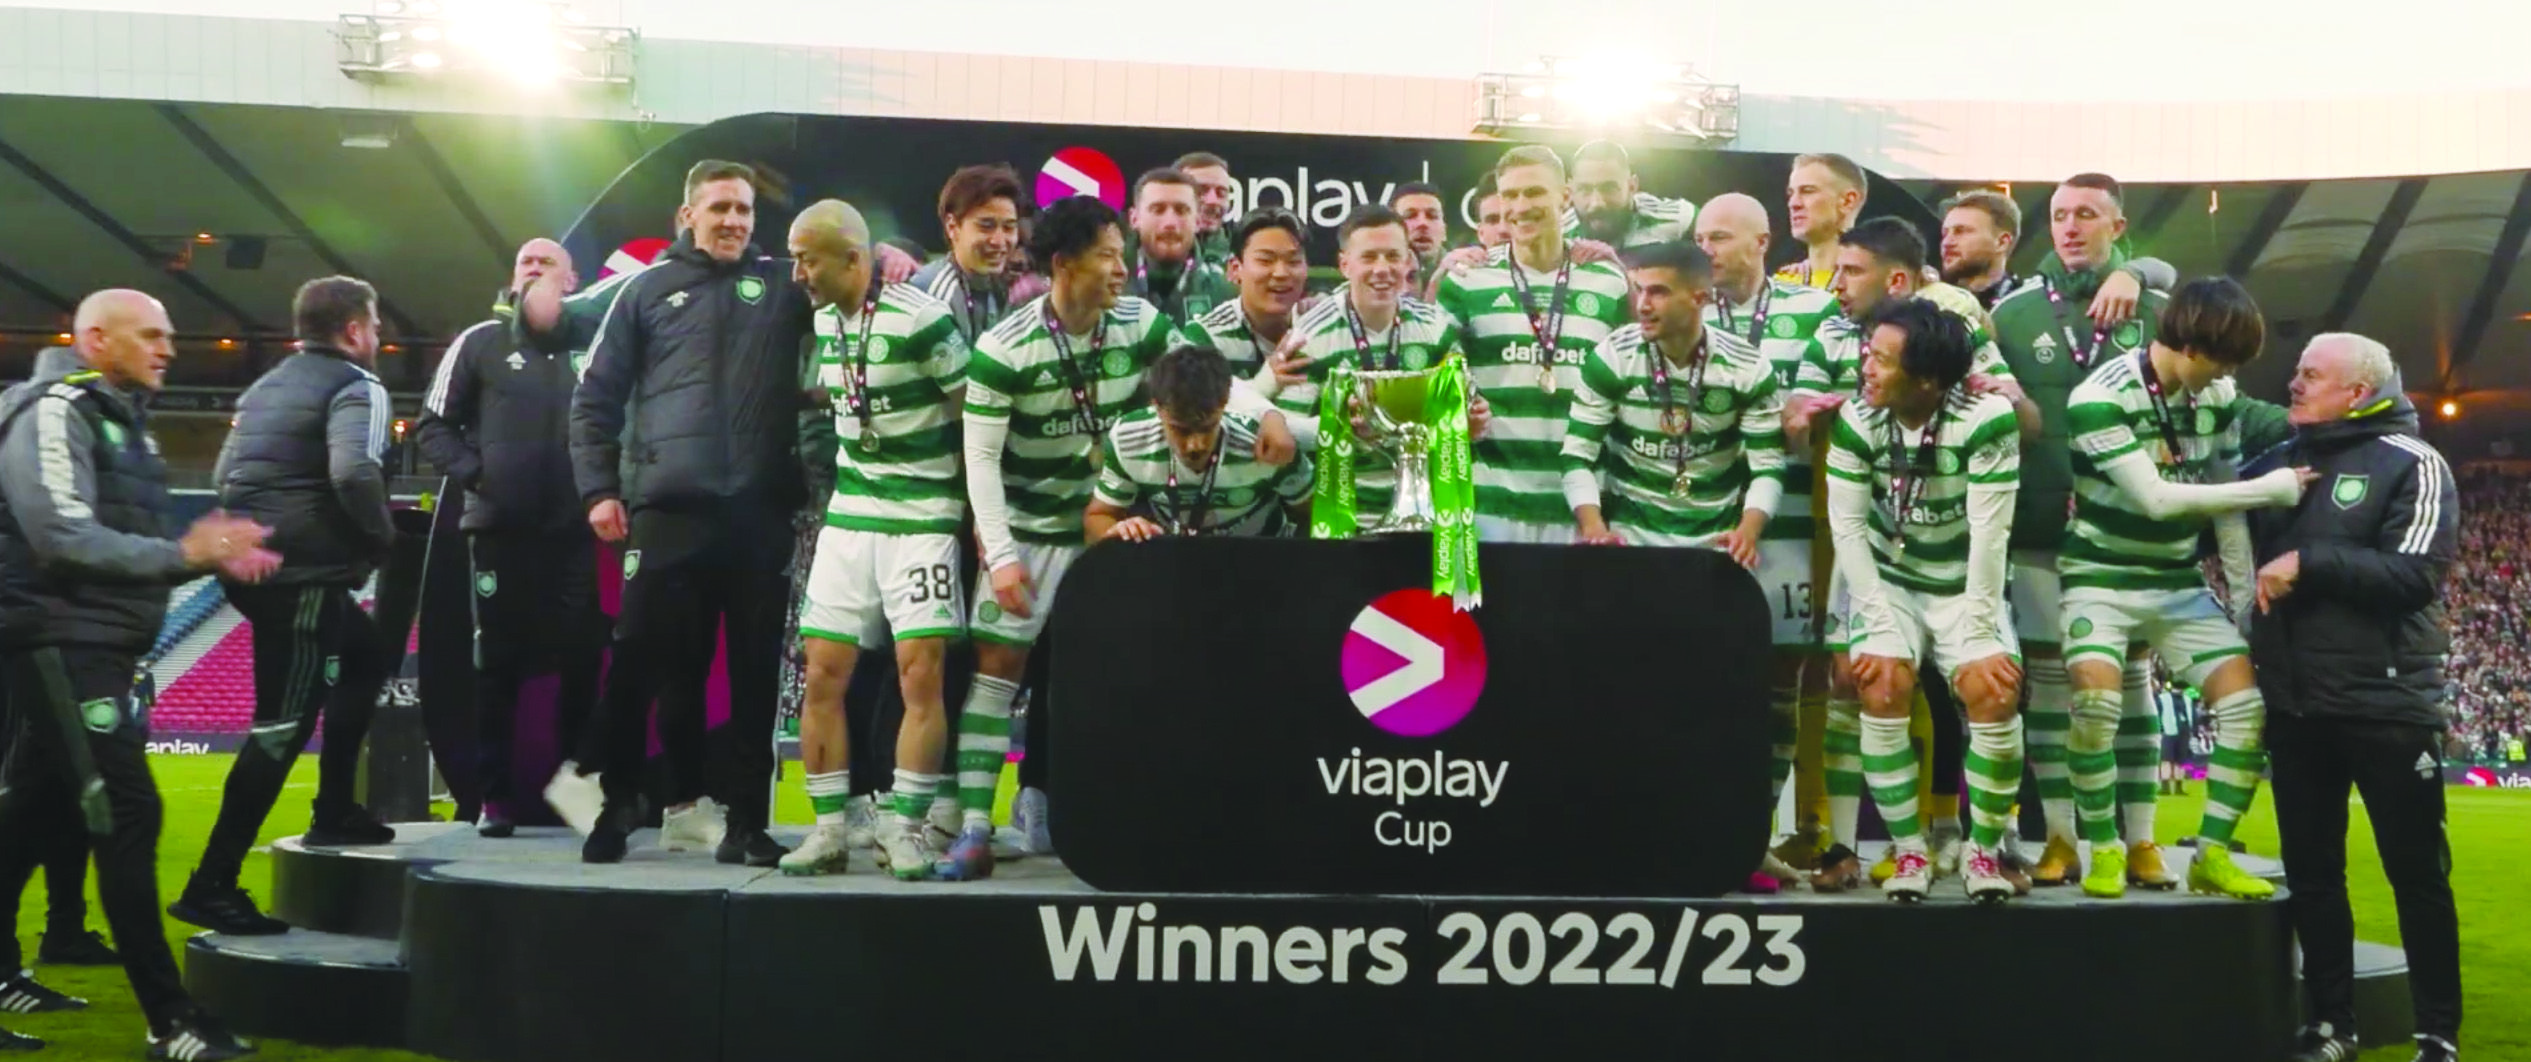 Celtic were worthy winners over Rangers in the Viaplay Cup final that keeps them on course for yet another treble